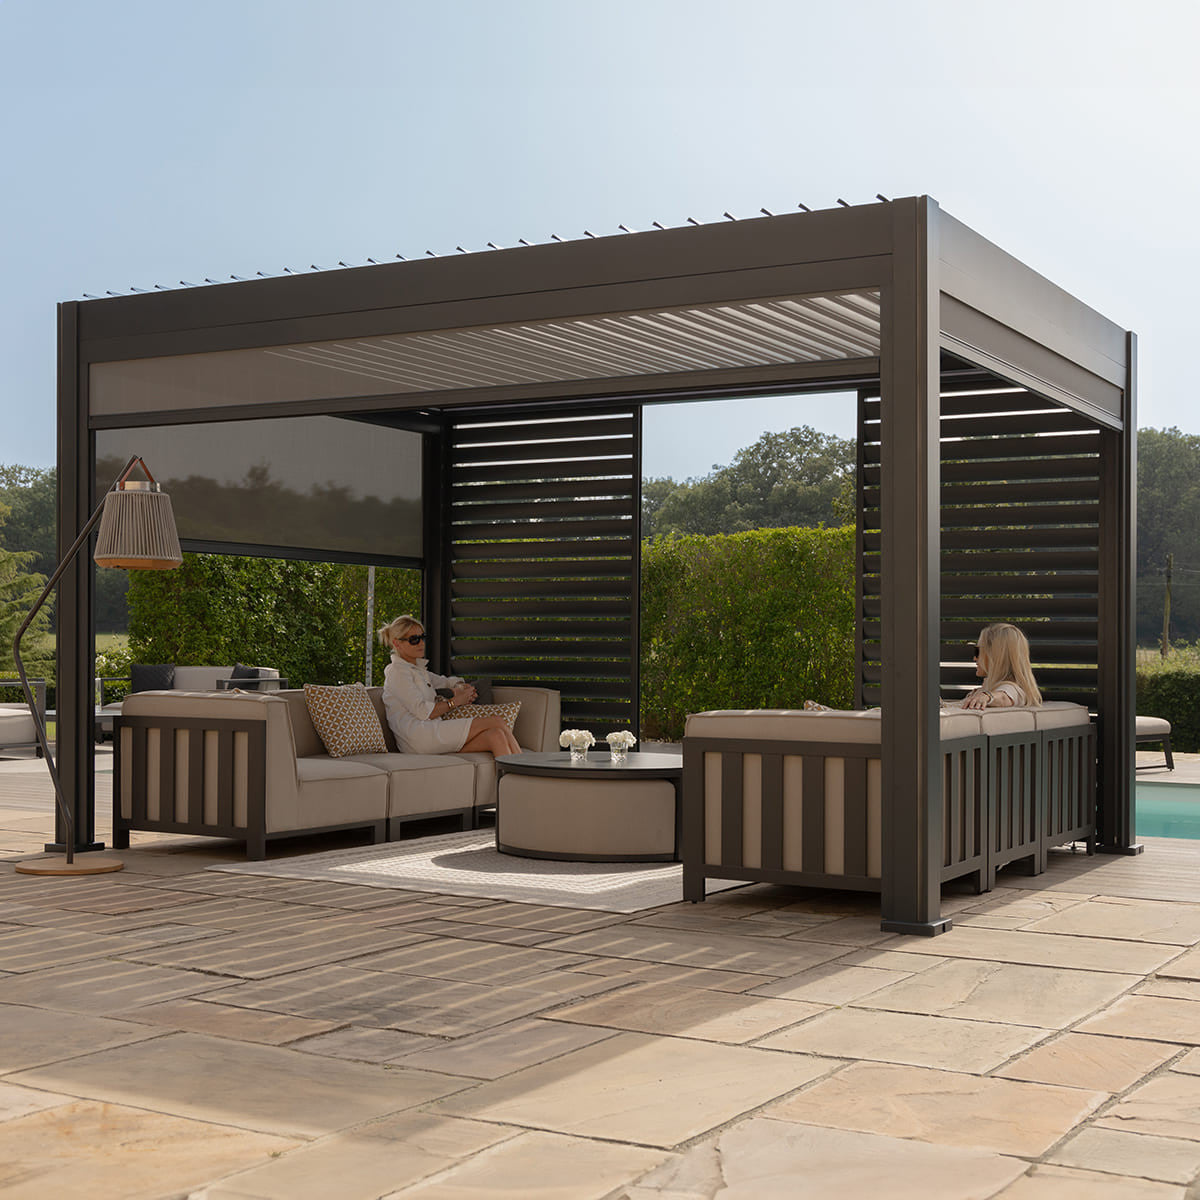 Maze Eden Pergola Aluminium Square 40x40 / Louvre Wall 4m / 3x Blinds From Other Side-Better Bed Company